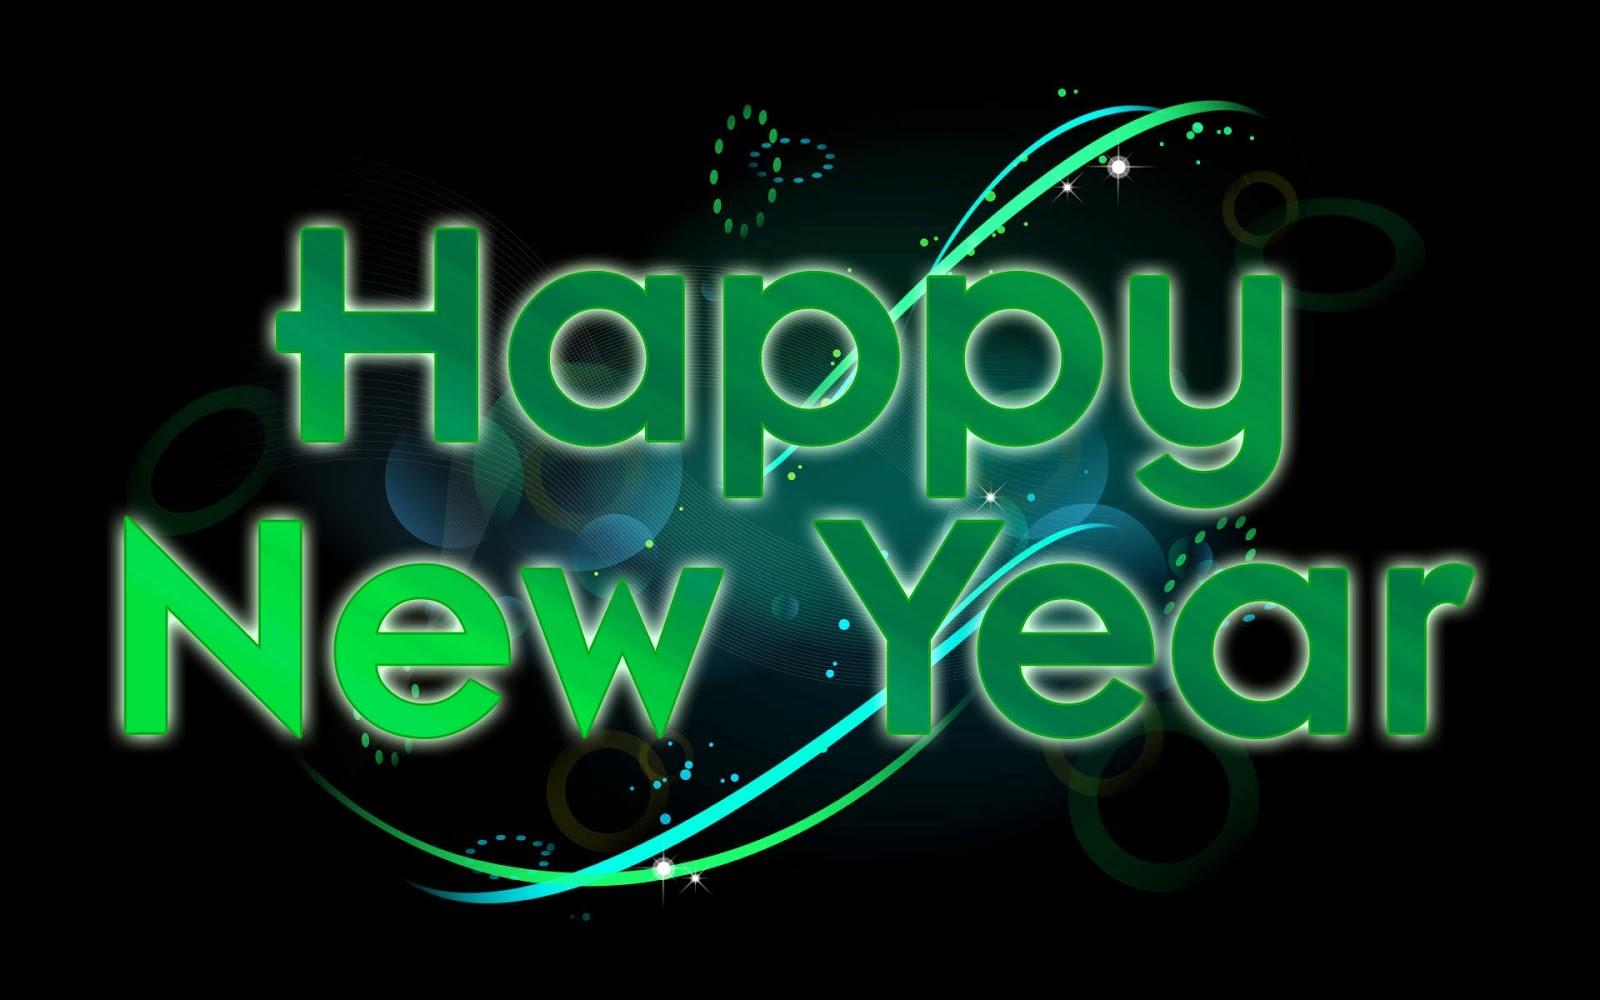 Happy New Year Wallpaper 2020 HD Image Free Download